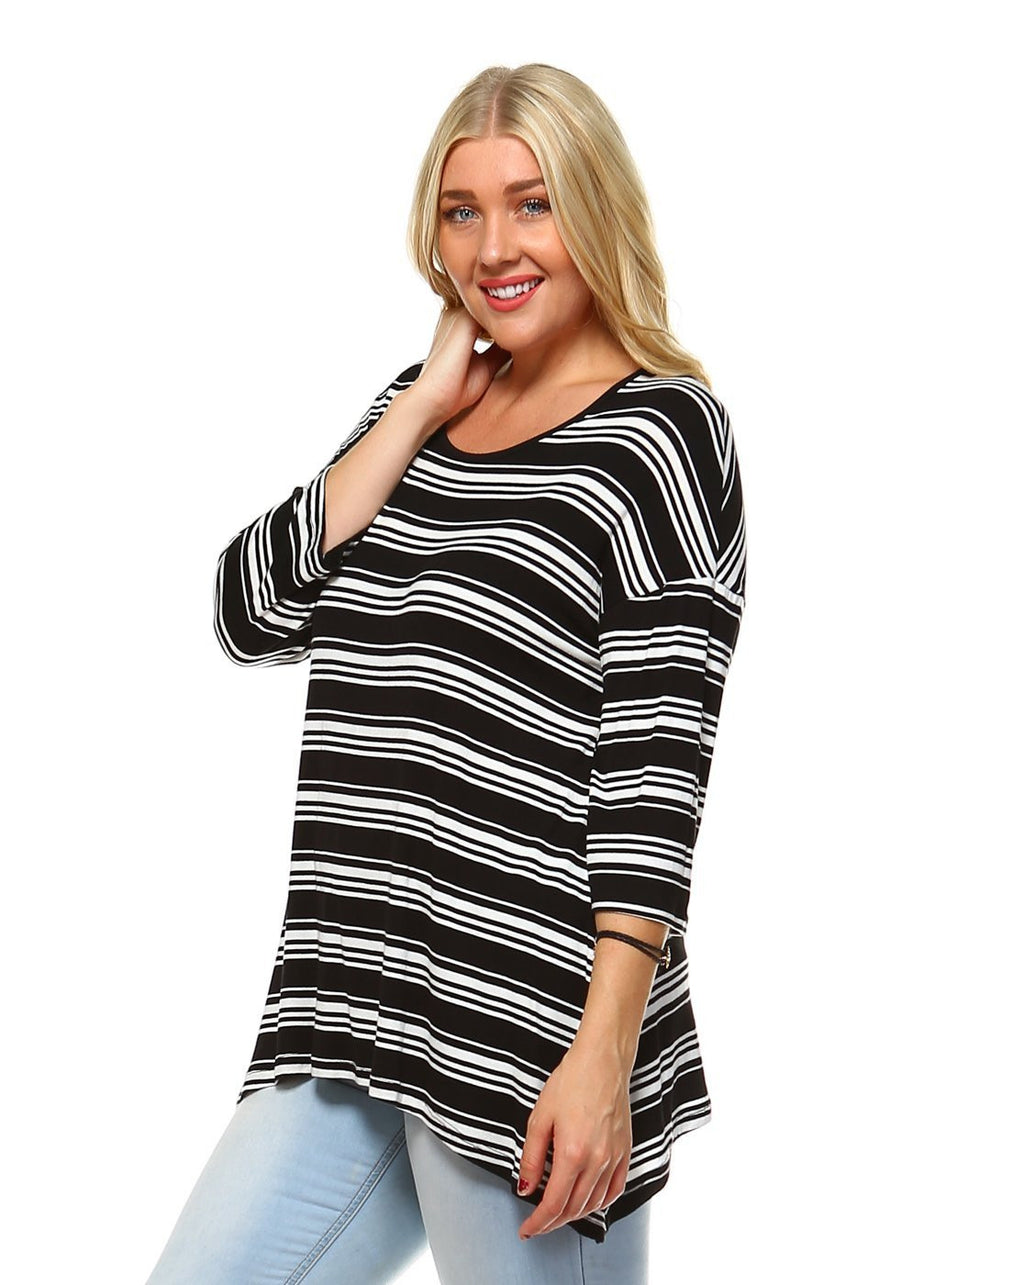 Striped round neck 3/4 dropped sleeve top with asymmetrical hem. Perfect for Everyday Comfort, Concerts, Festivals, Date Night, Brunch, Shopping, lightweight fabric for any season